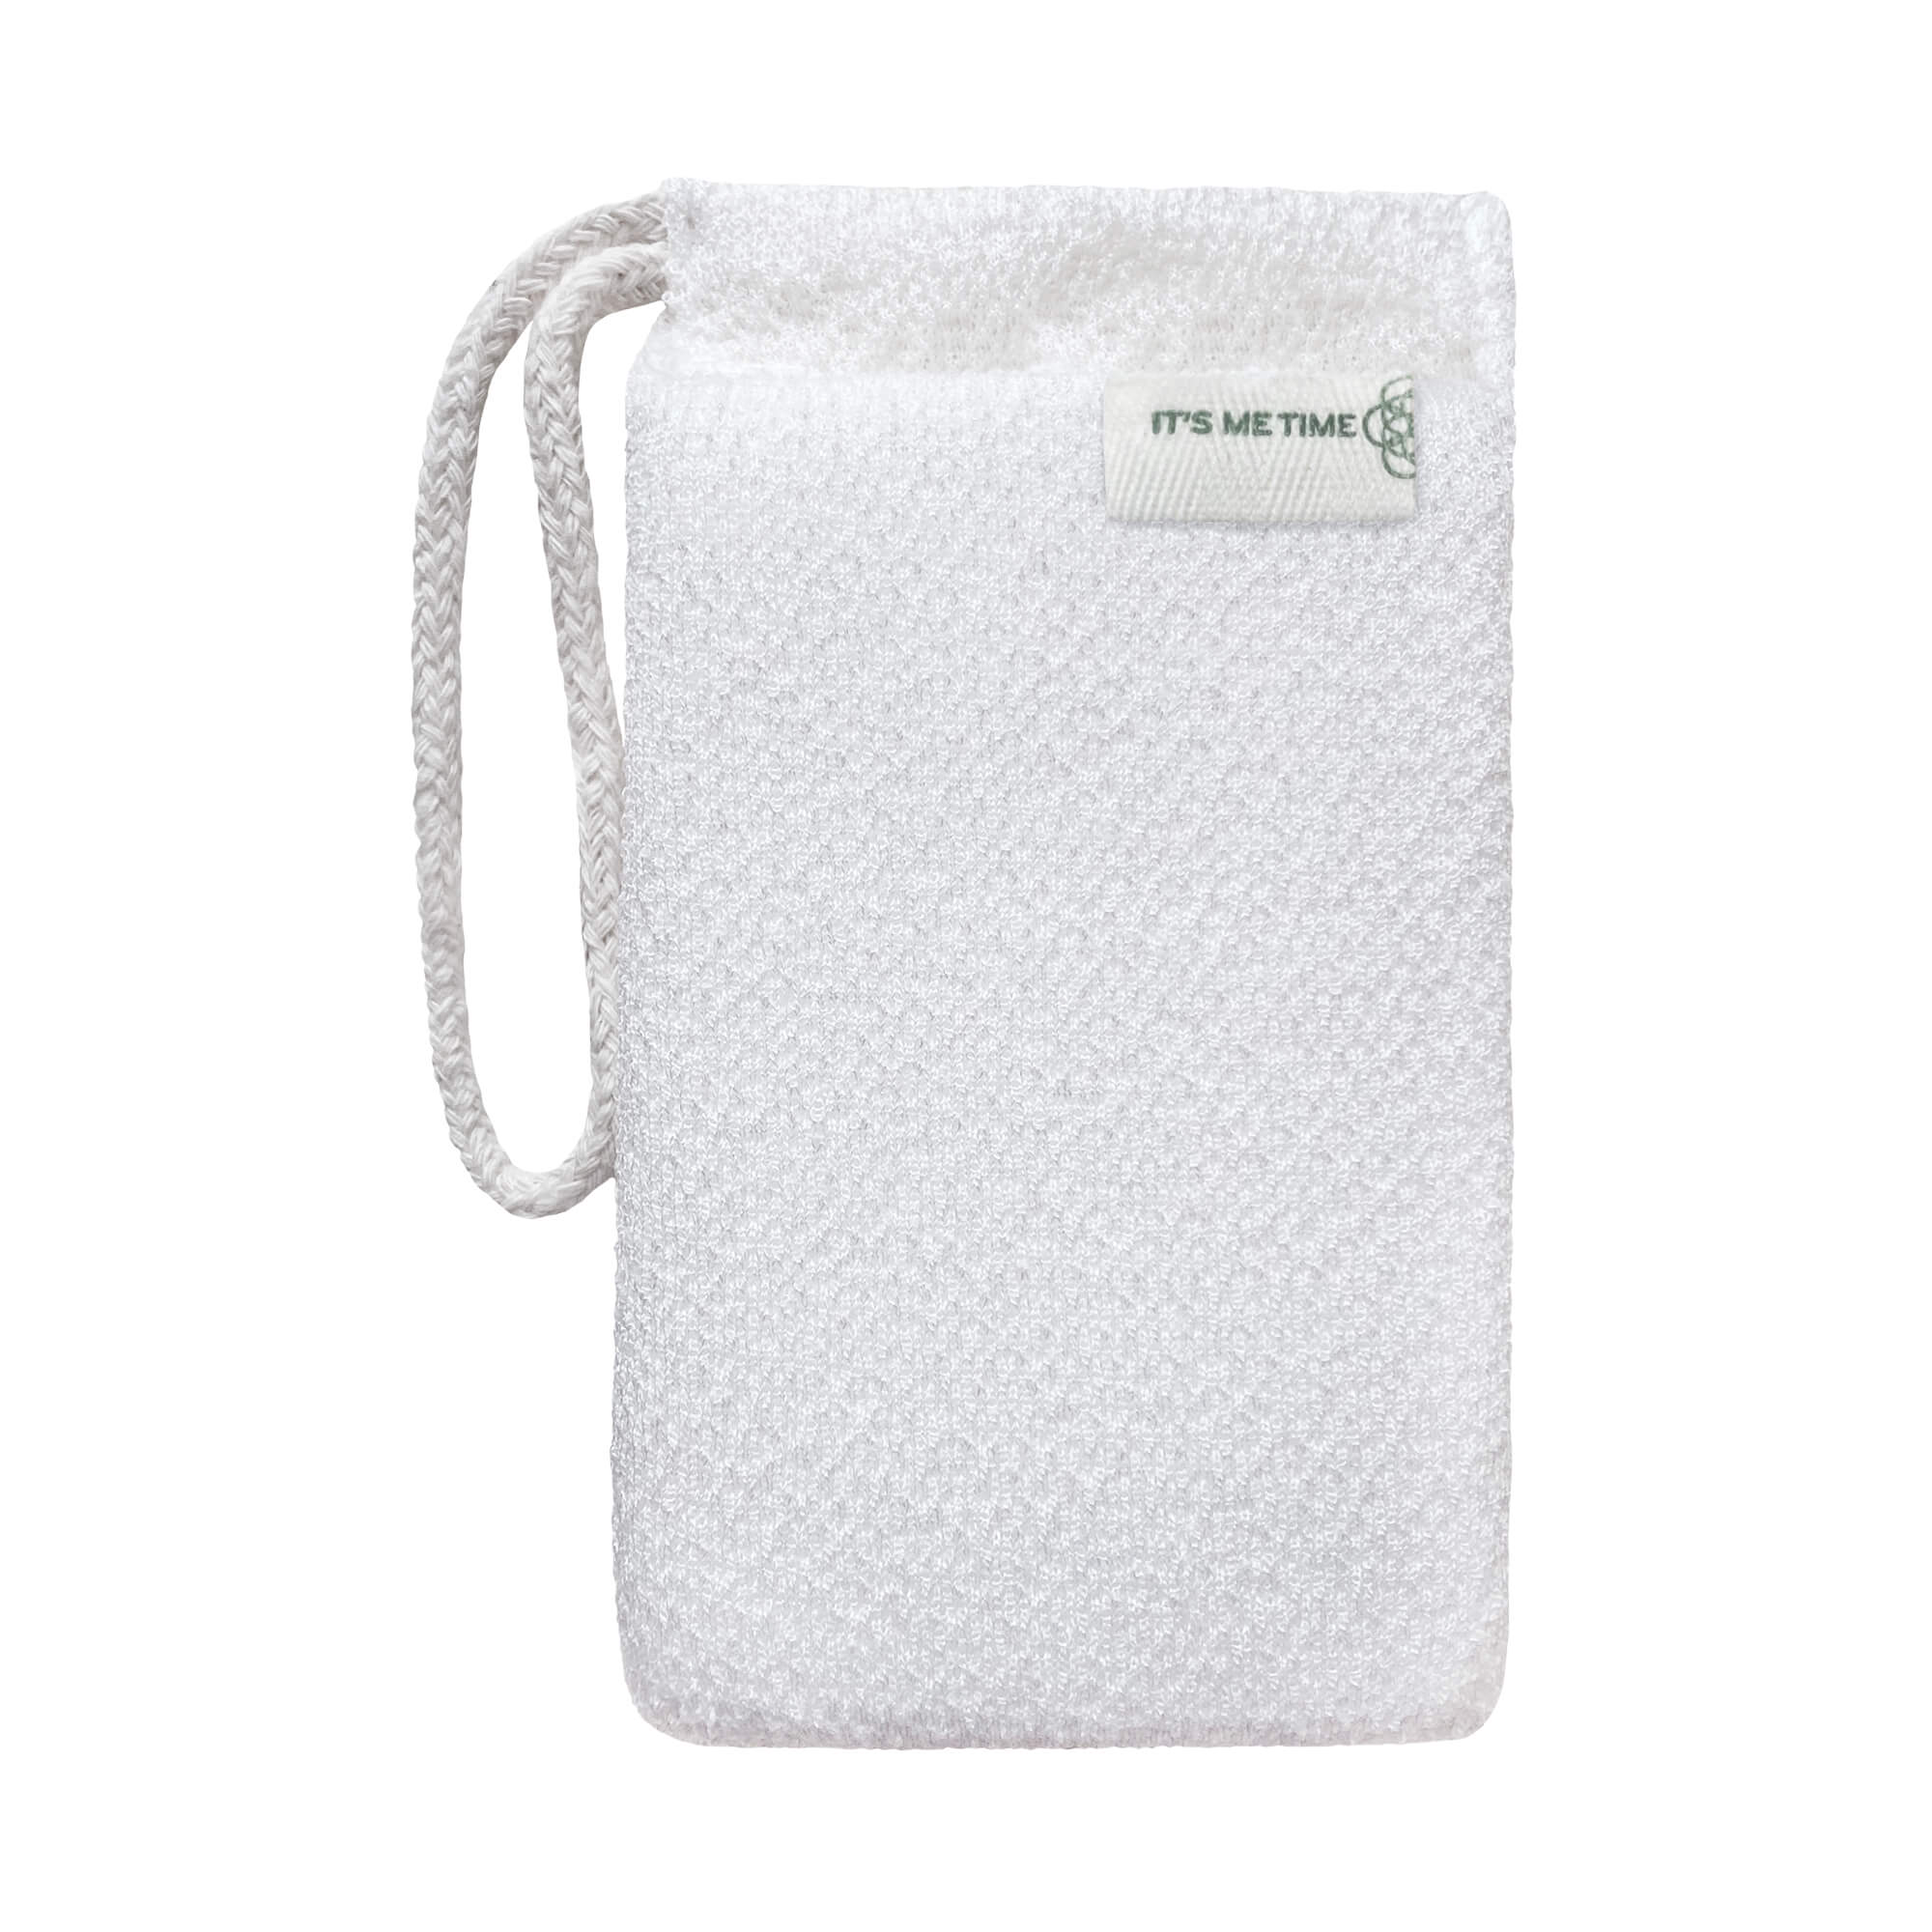 Daily Body Towel Wrap by Daily Concepts luxury Spa goods – DAILY CONCEPTS